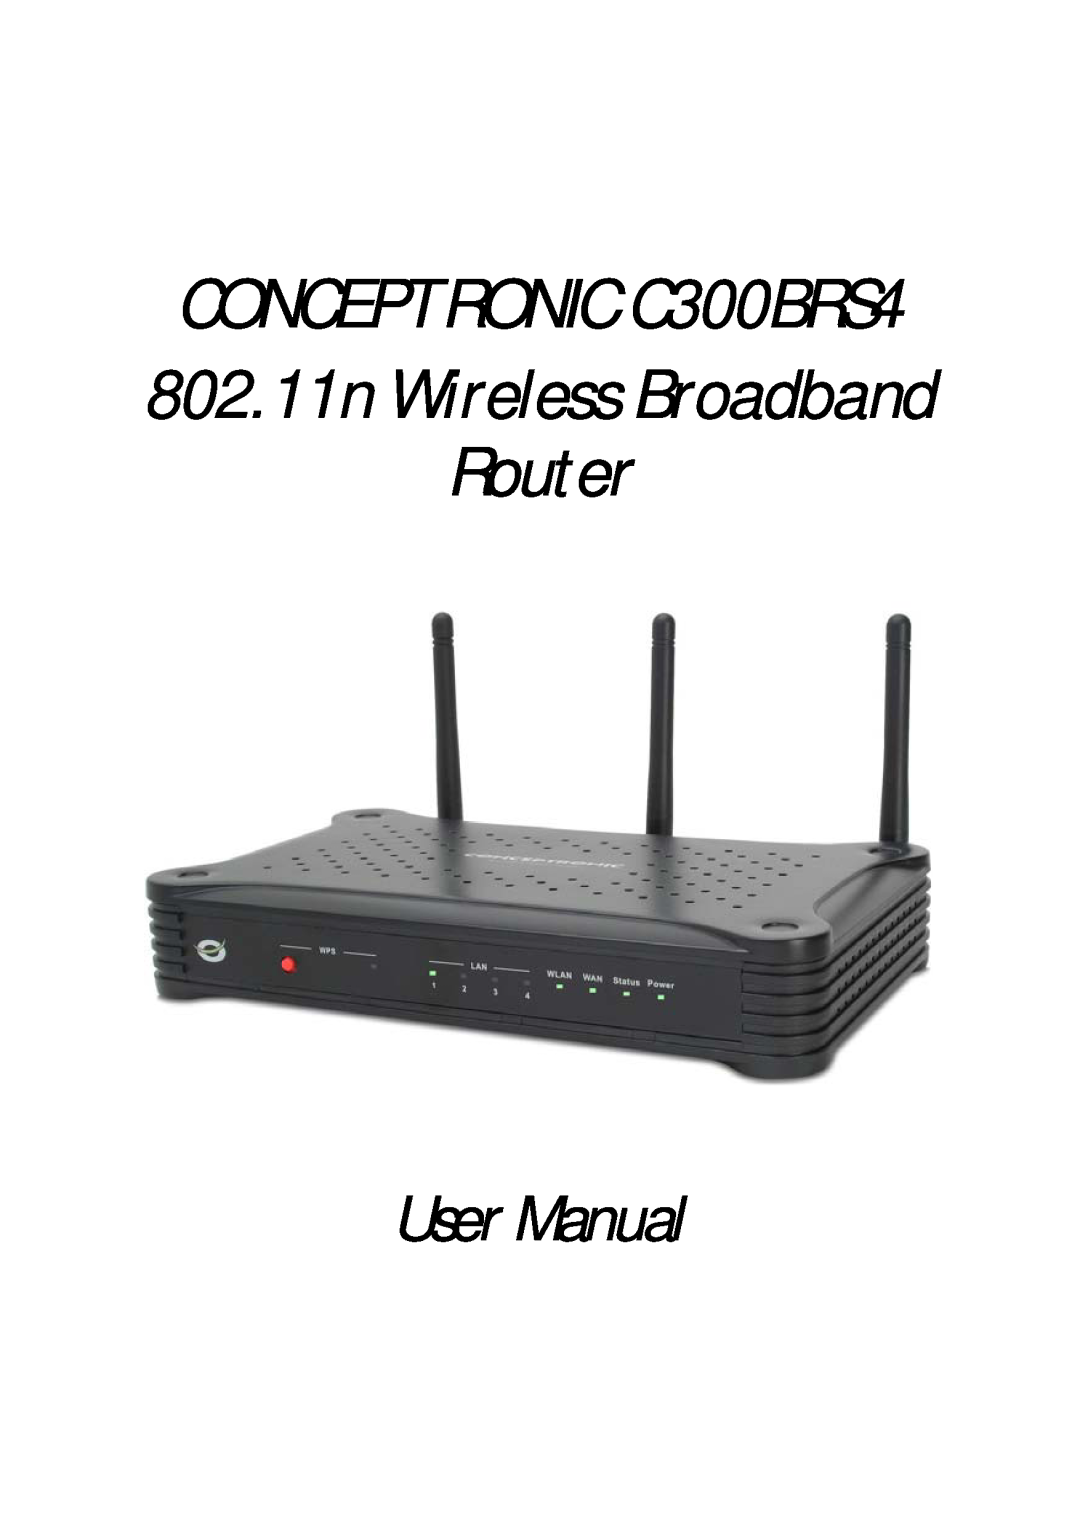 Conceptronic user manual CONCEPTRONIC C300BRS4 802.11n Wireless Broadband Router, User Manual 